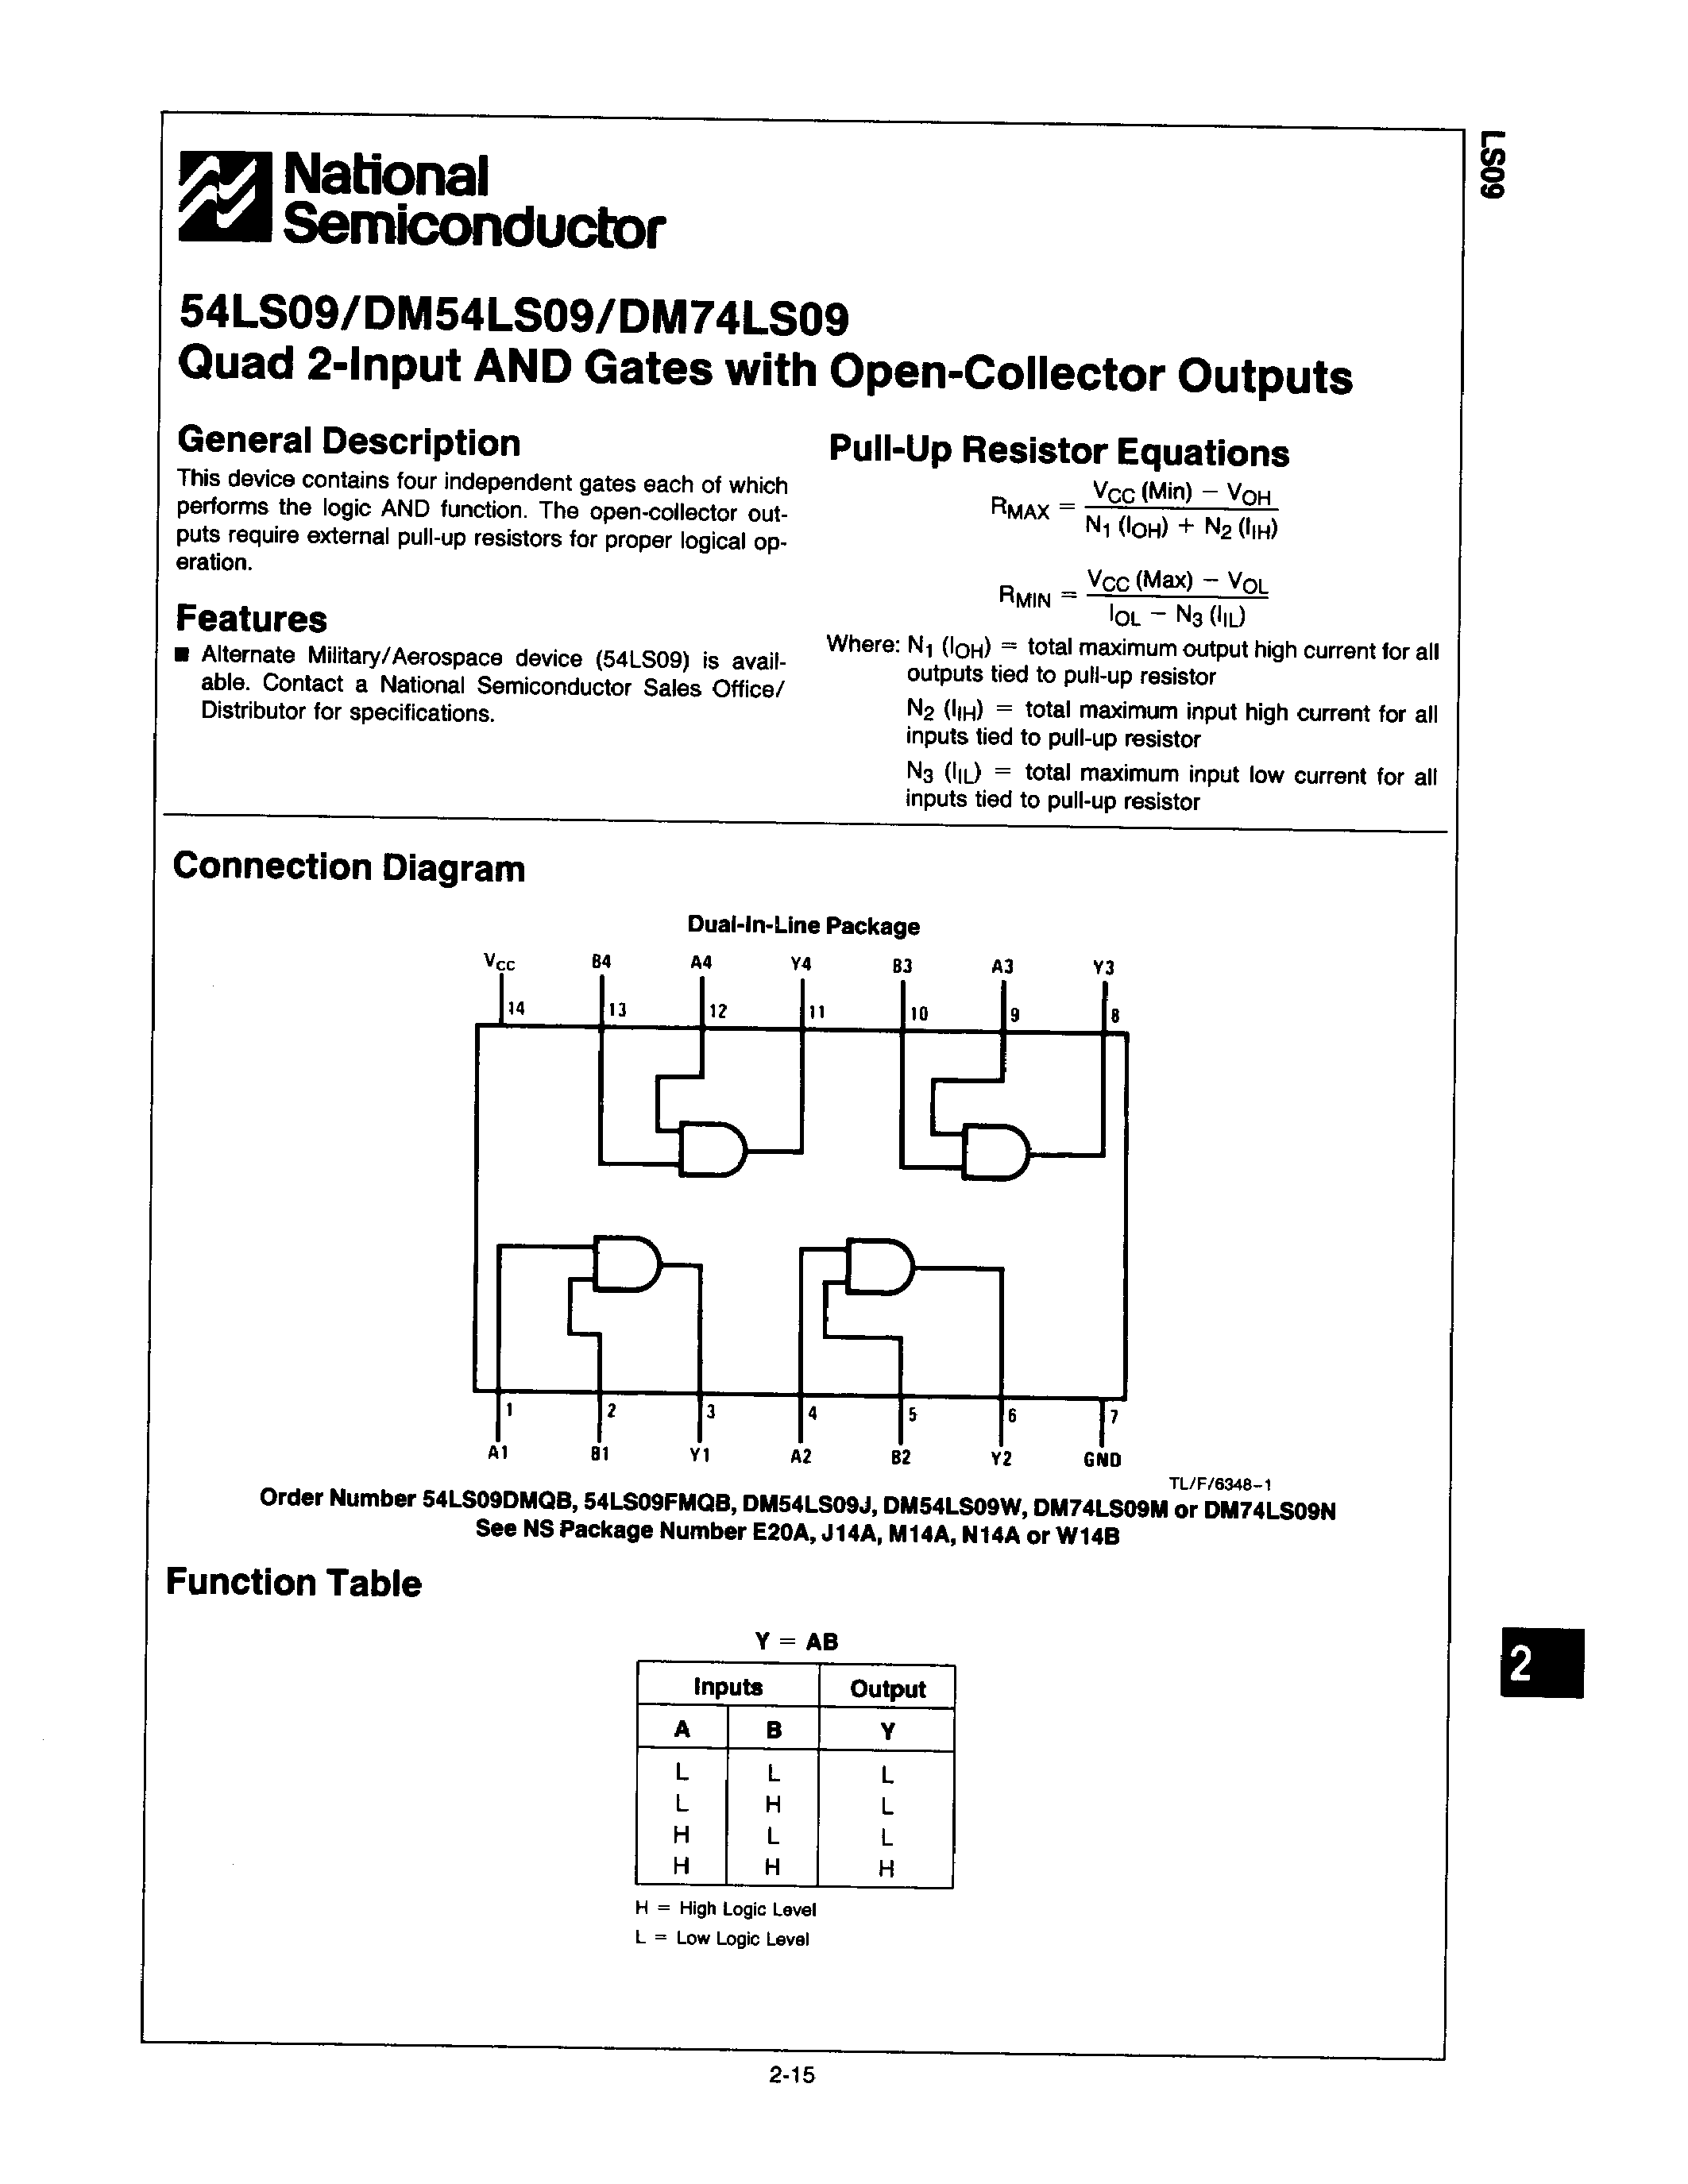 Даташит 54LS09 - QUAD 2-INPUT AND GATES WITH OPEN-COLLECTOR OUTPUTS страница 1